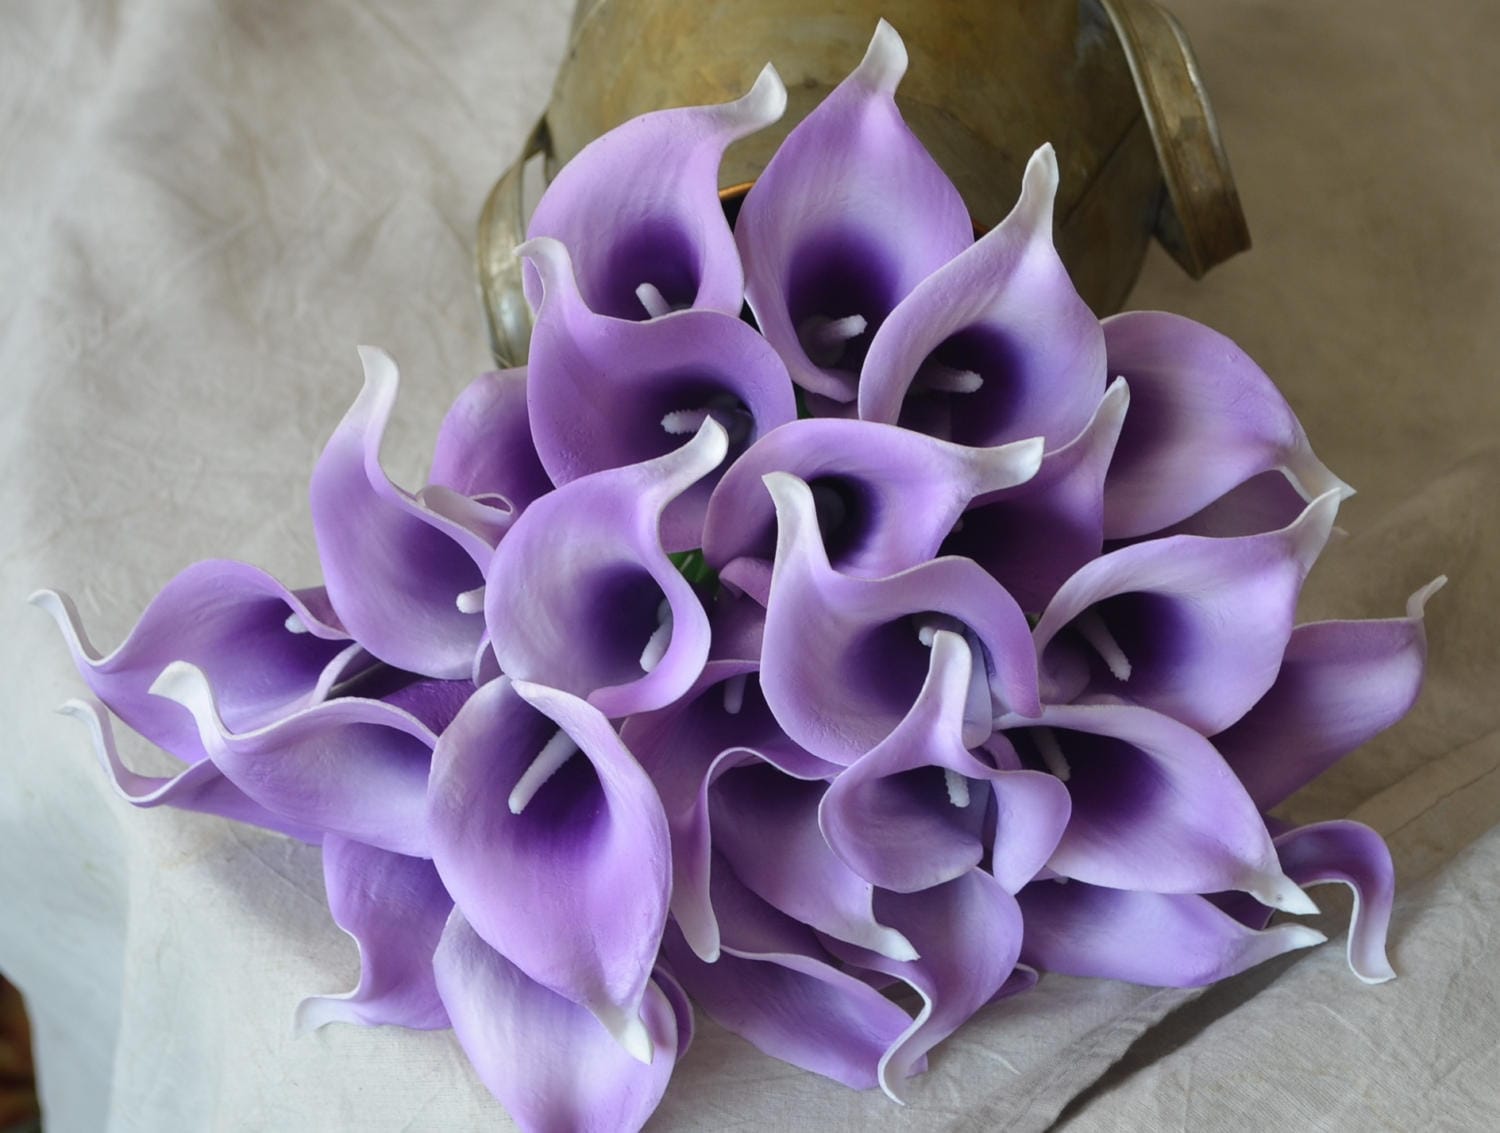 10 lilac Calla Lilies Real Touch Flowers For Silk Bridal Wedding Centerpieces 